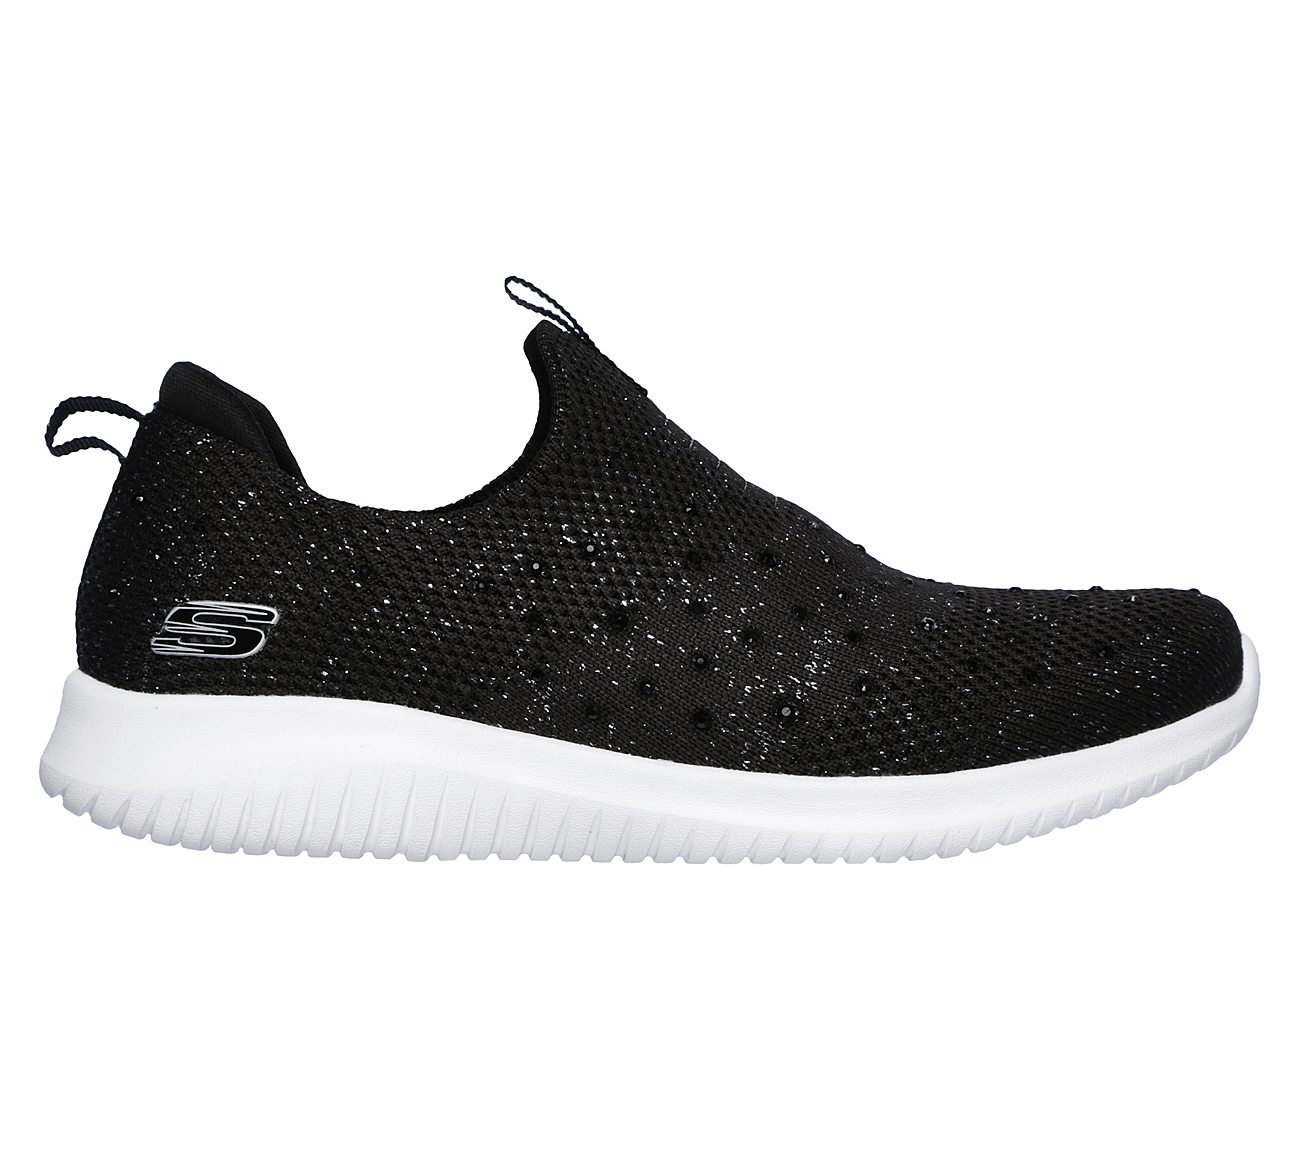 ULTRA FLEX - THRIVE UP, BLACK/SILVER Footwear Lateral View